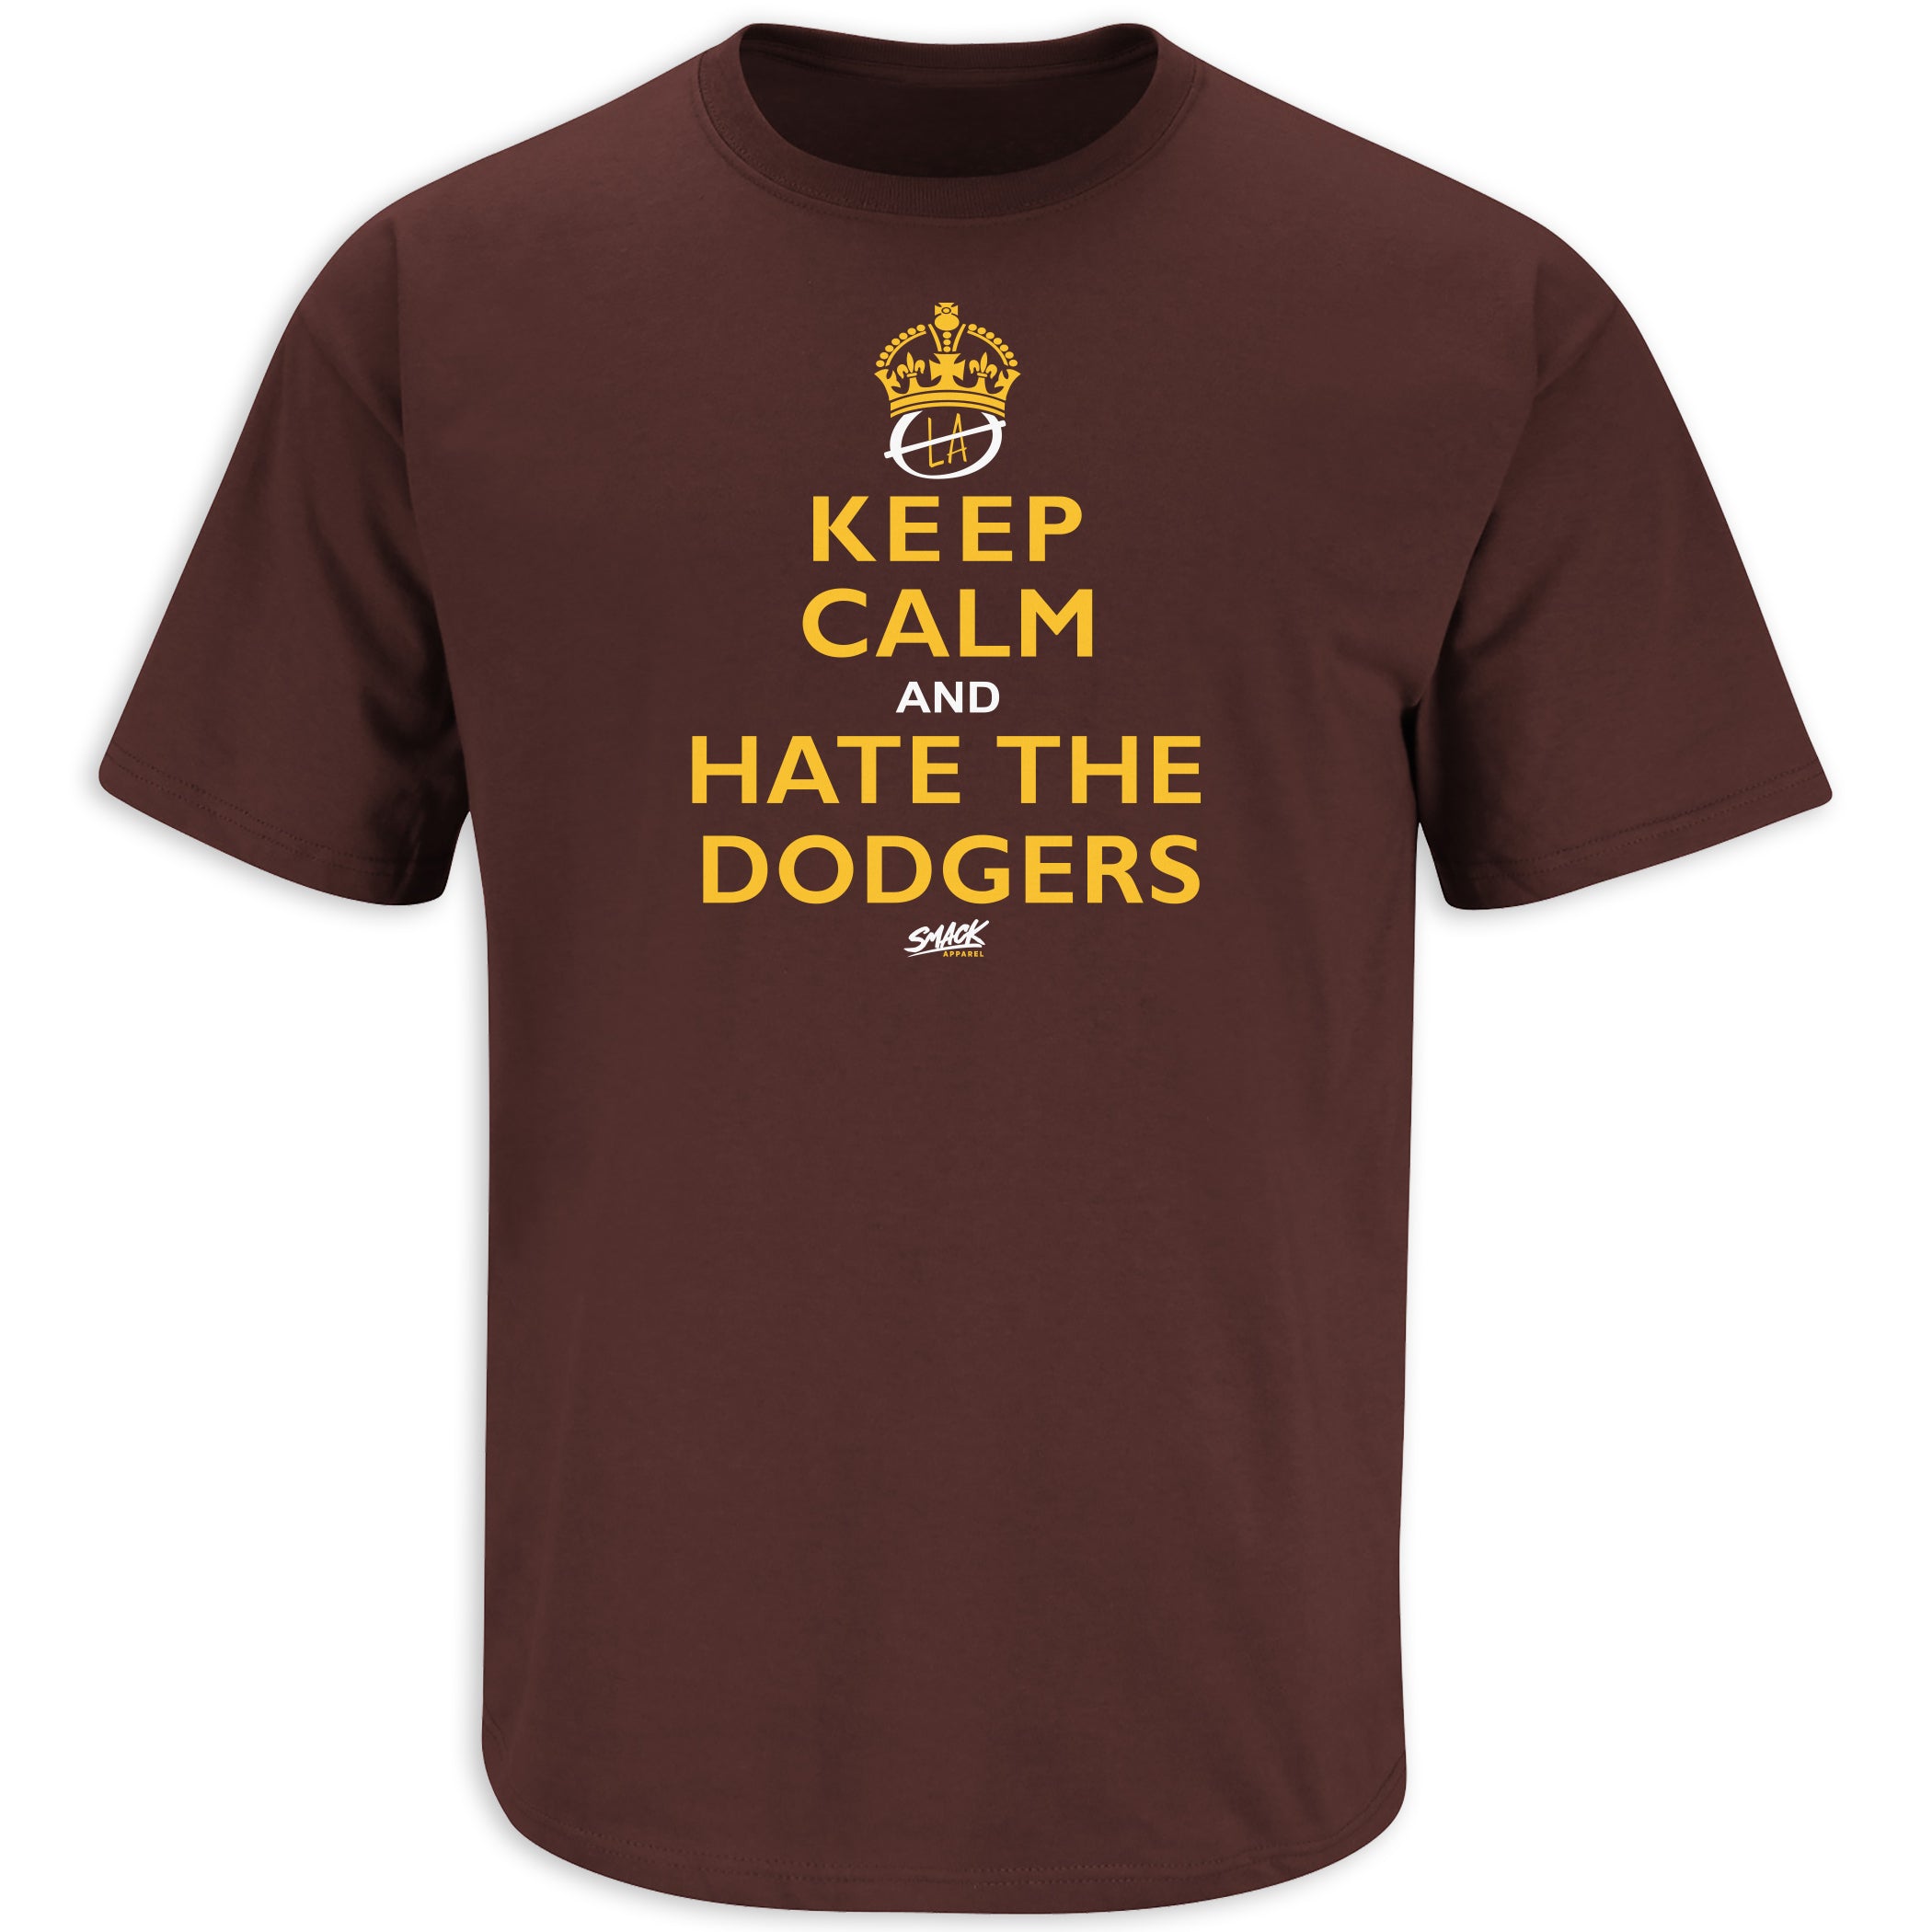 Smack Apparel Keep Calm and Hate The Dodgers T-Shirt for San Diego Baseball Fans Short Sleeve / 2XL / Brown